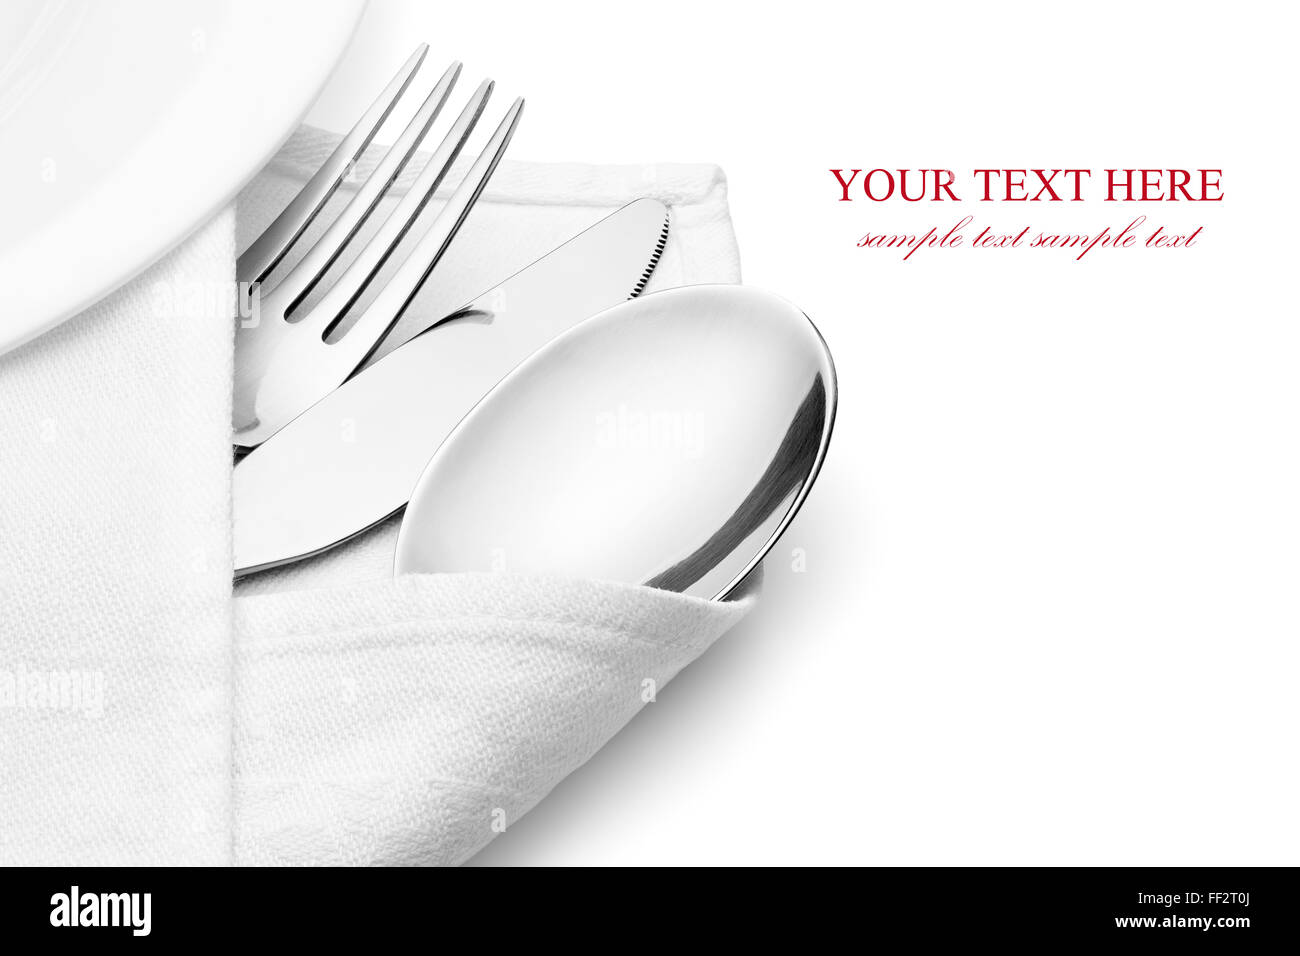 Knife, fork and spoon with linen serviette, isolated on the white background, clipping path included. Stock Photo